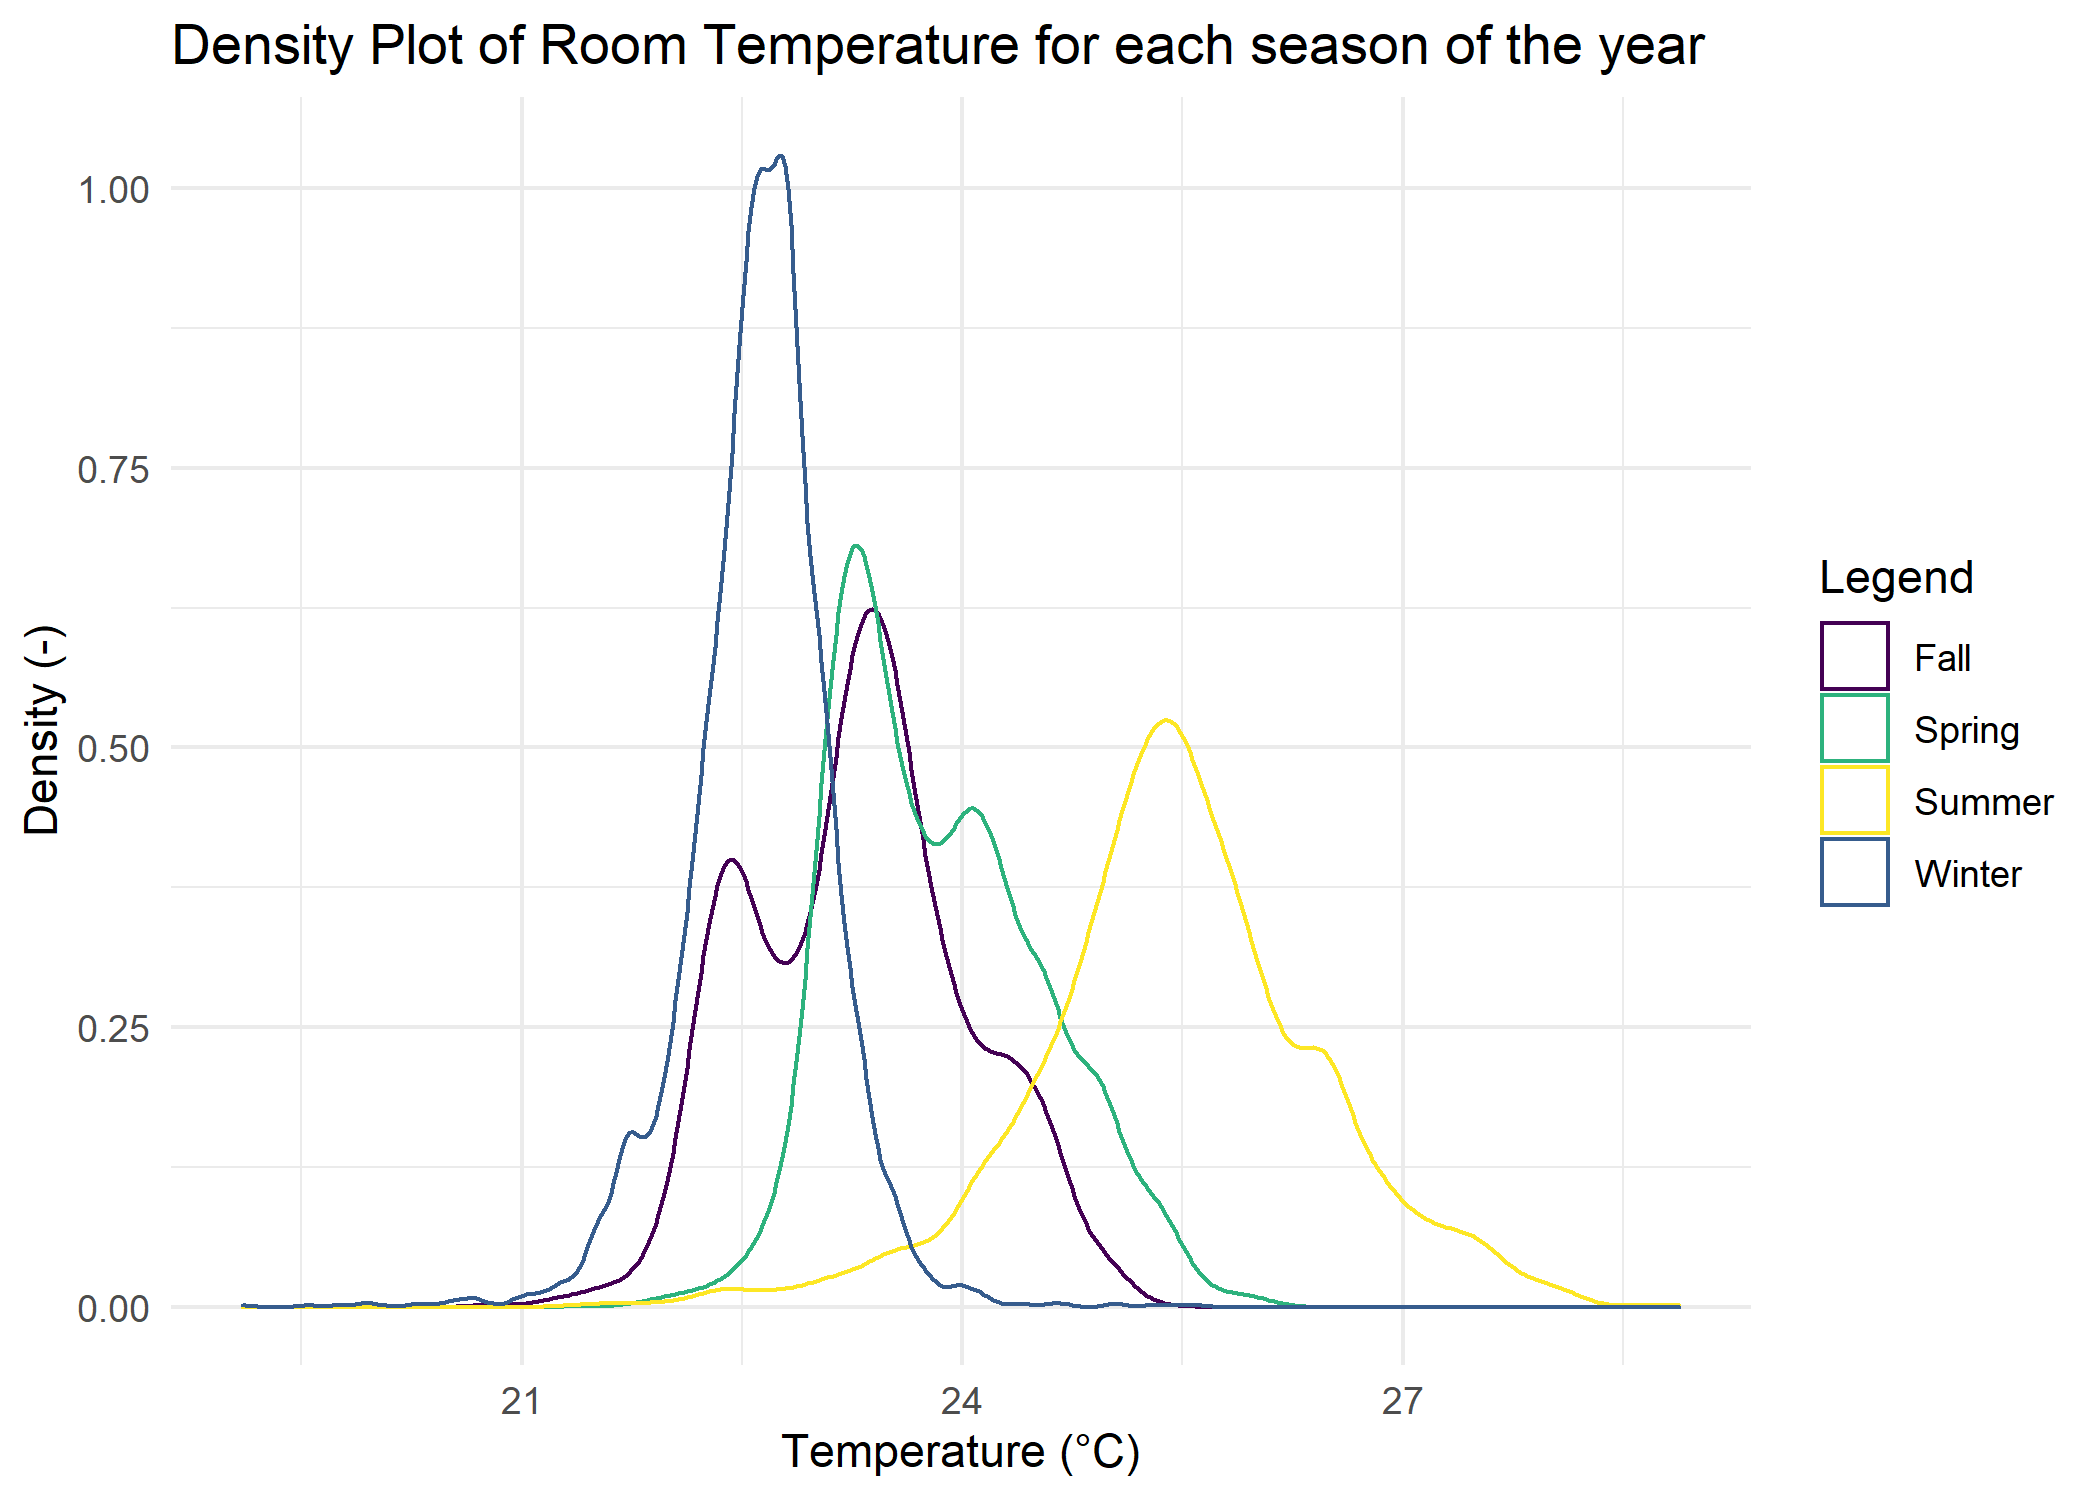 Density Plot Temperature for each season of the year